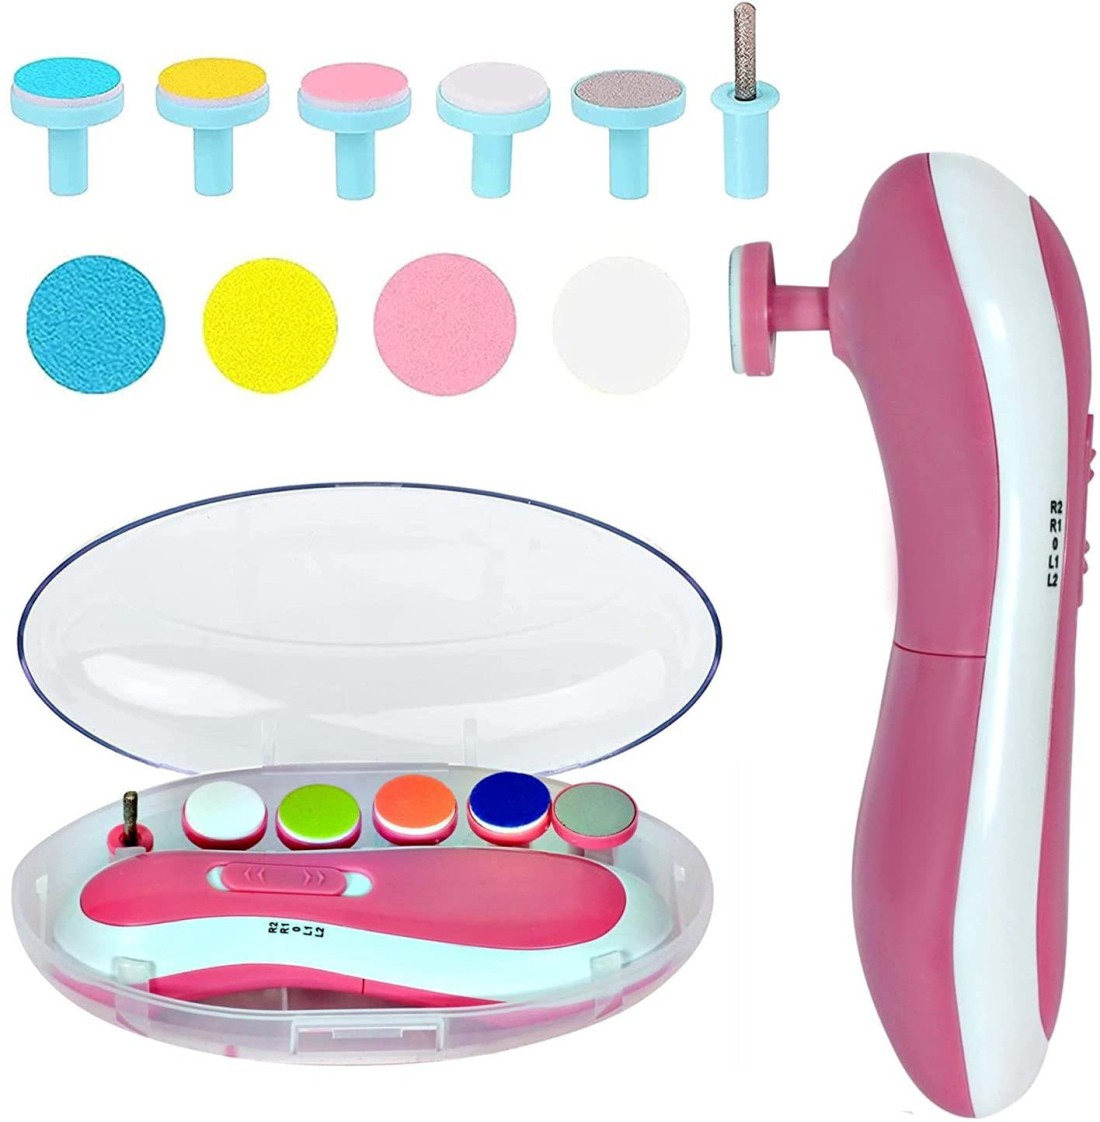 Topretty Electric Nail Clipper, Automatic Nail India | Ubuy